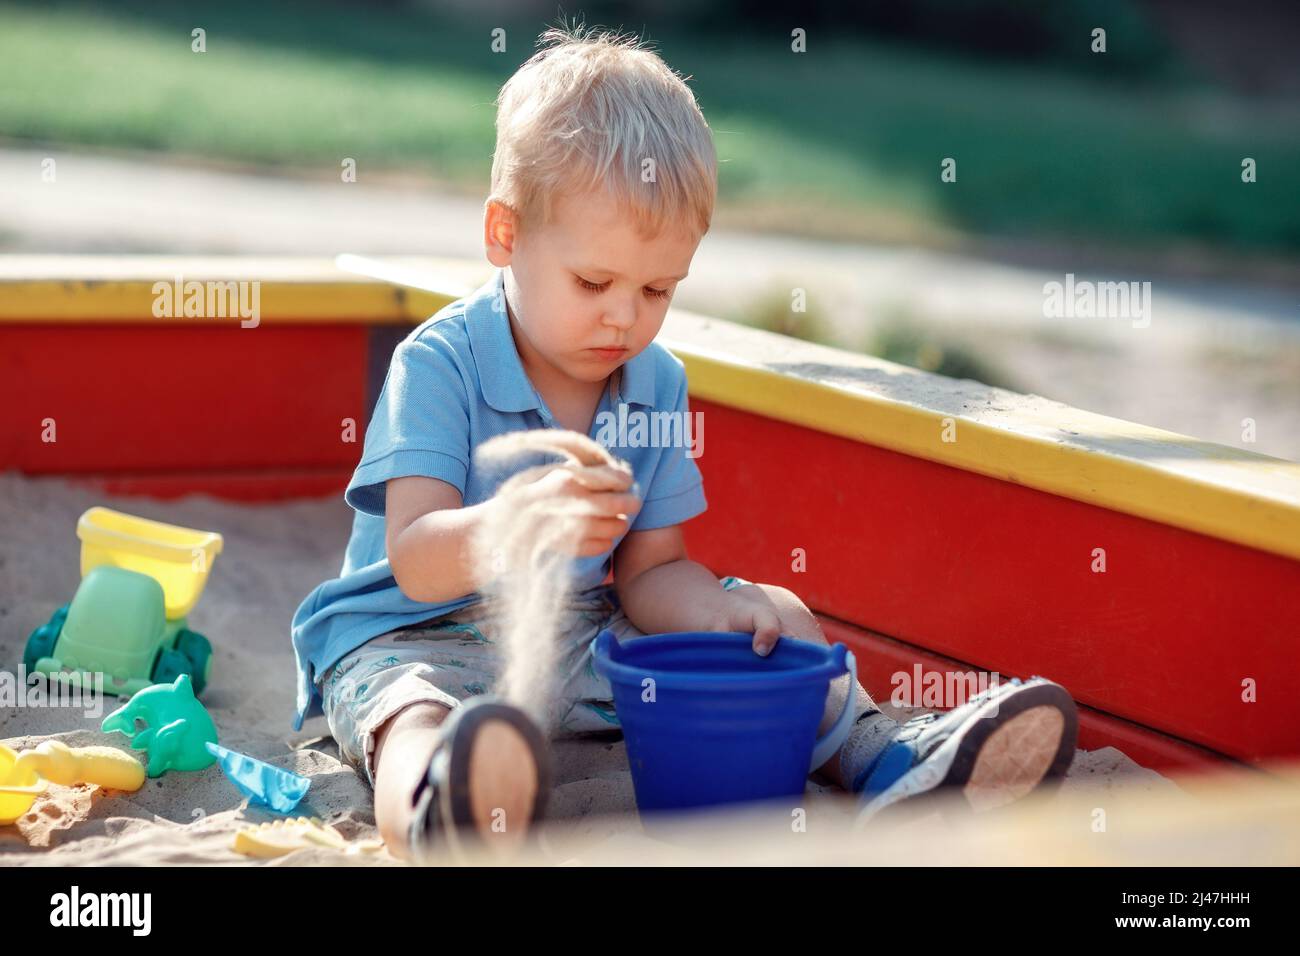 Toddler boy is playing in a red and yellow edge sandbox with sand toys. Focused baby, wearing blue shirt is trying to put sand in a blue bucket. Child Stock Photo